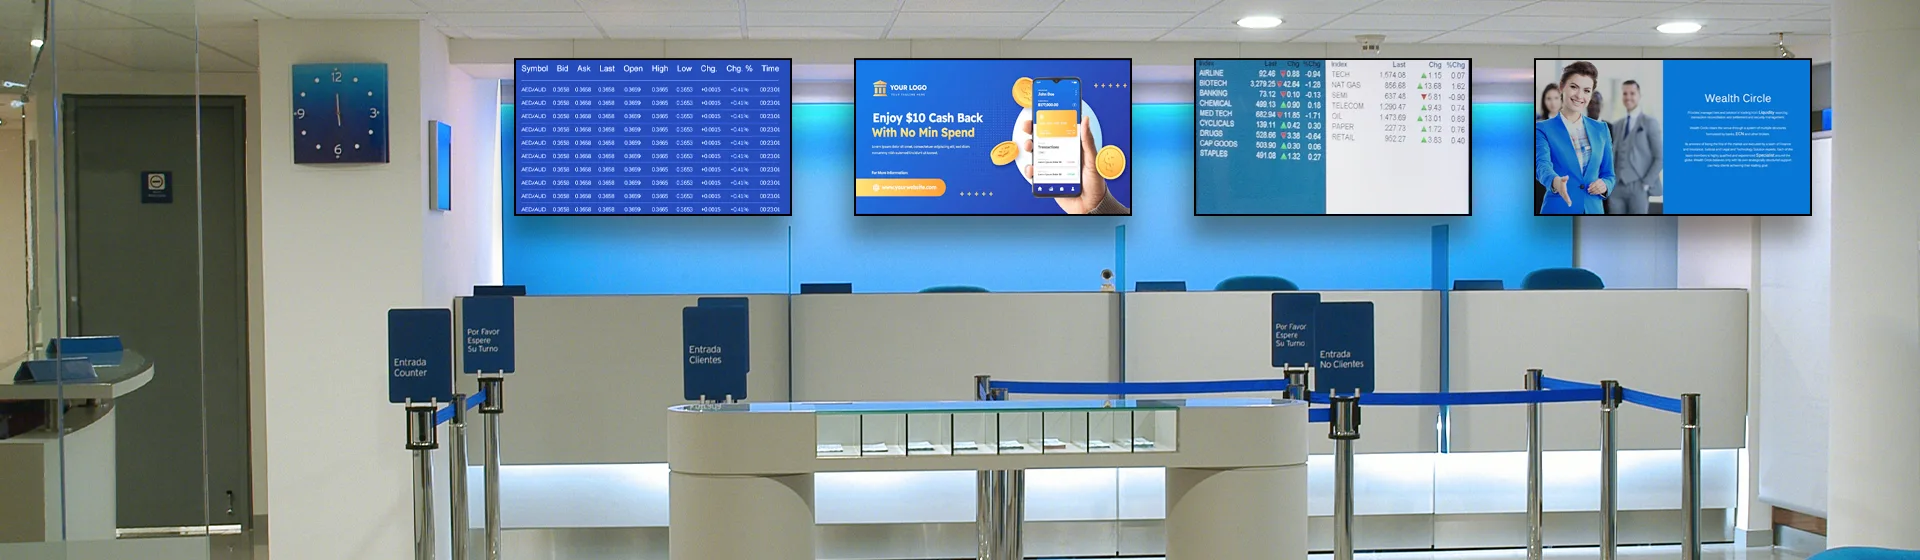 Commercial display in the financial industry solution